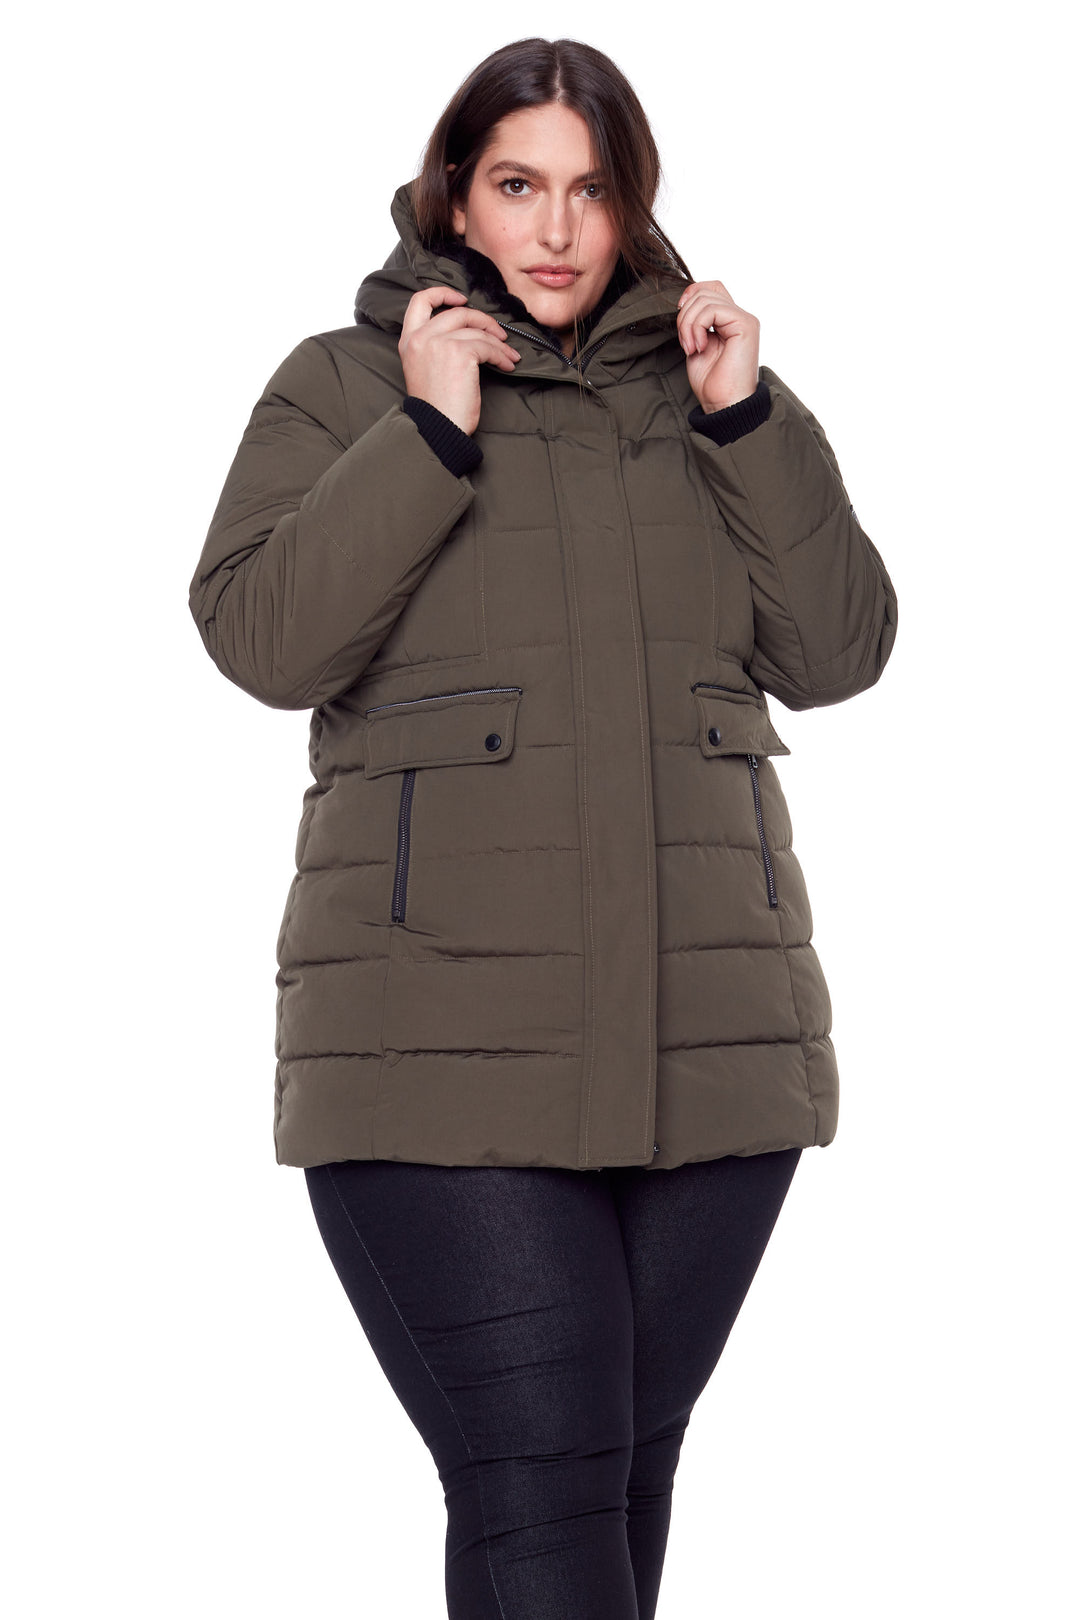 Plus Size Winter Parka Coat For Women Fashionable Down Jacket With Hoodie,  Thick Ladies Long Puffer Coat, And Plus Size Options M 6XL T190610 From  Xue03, $23.21